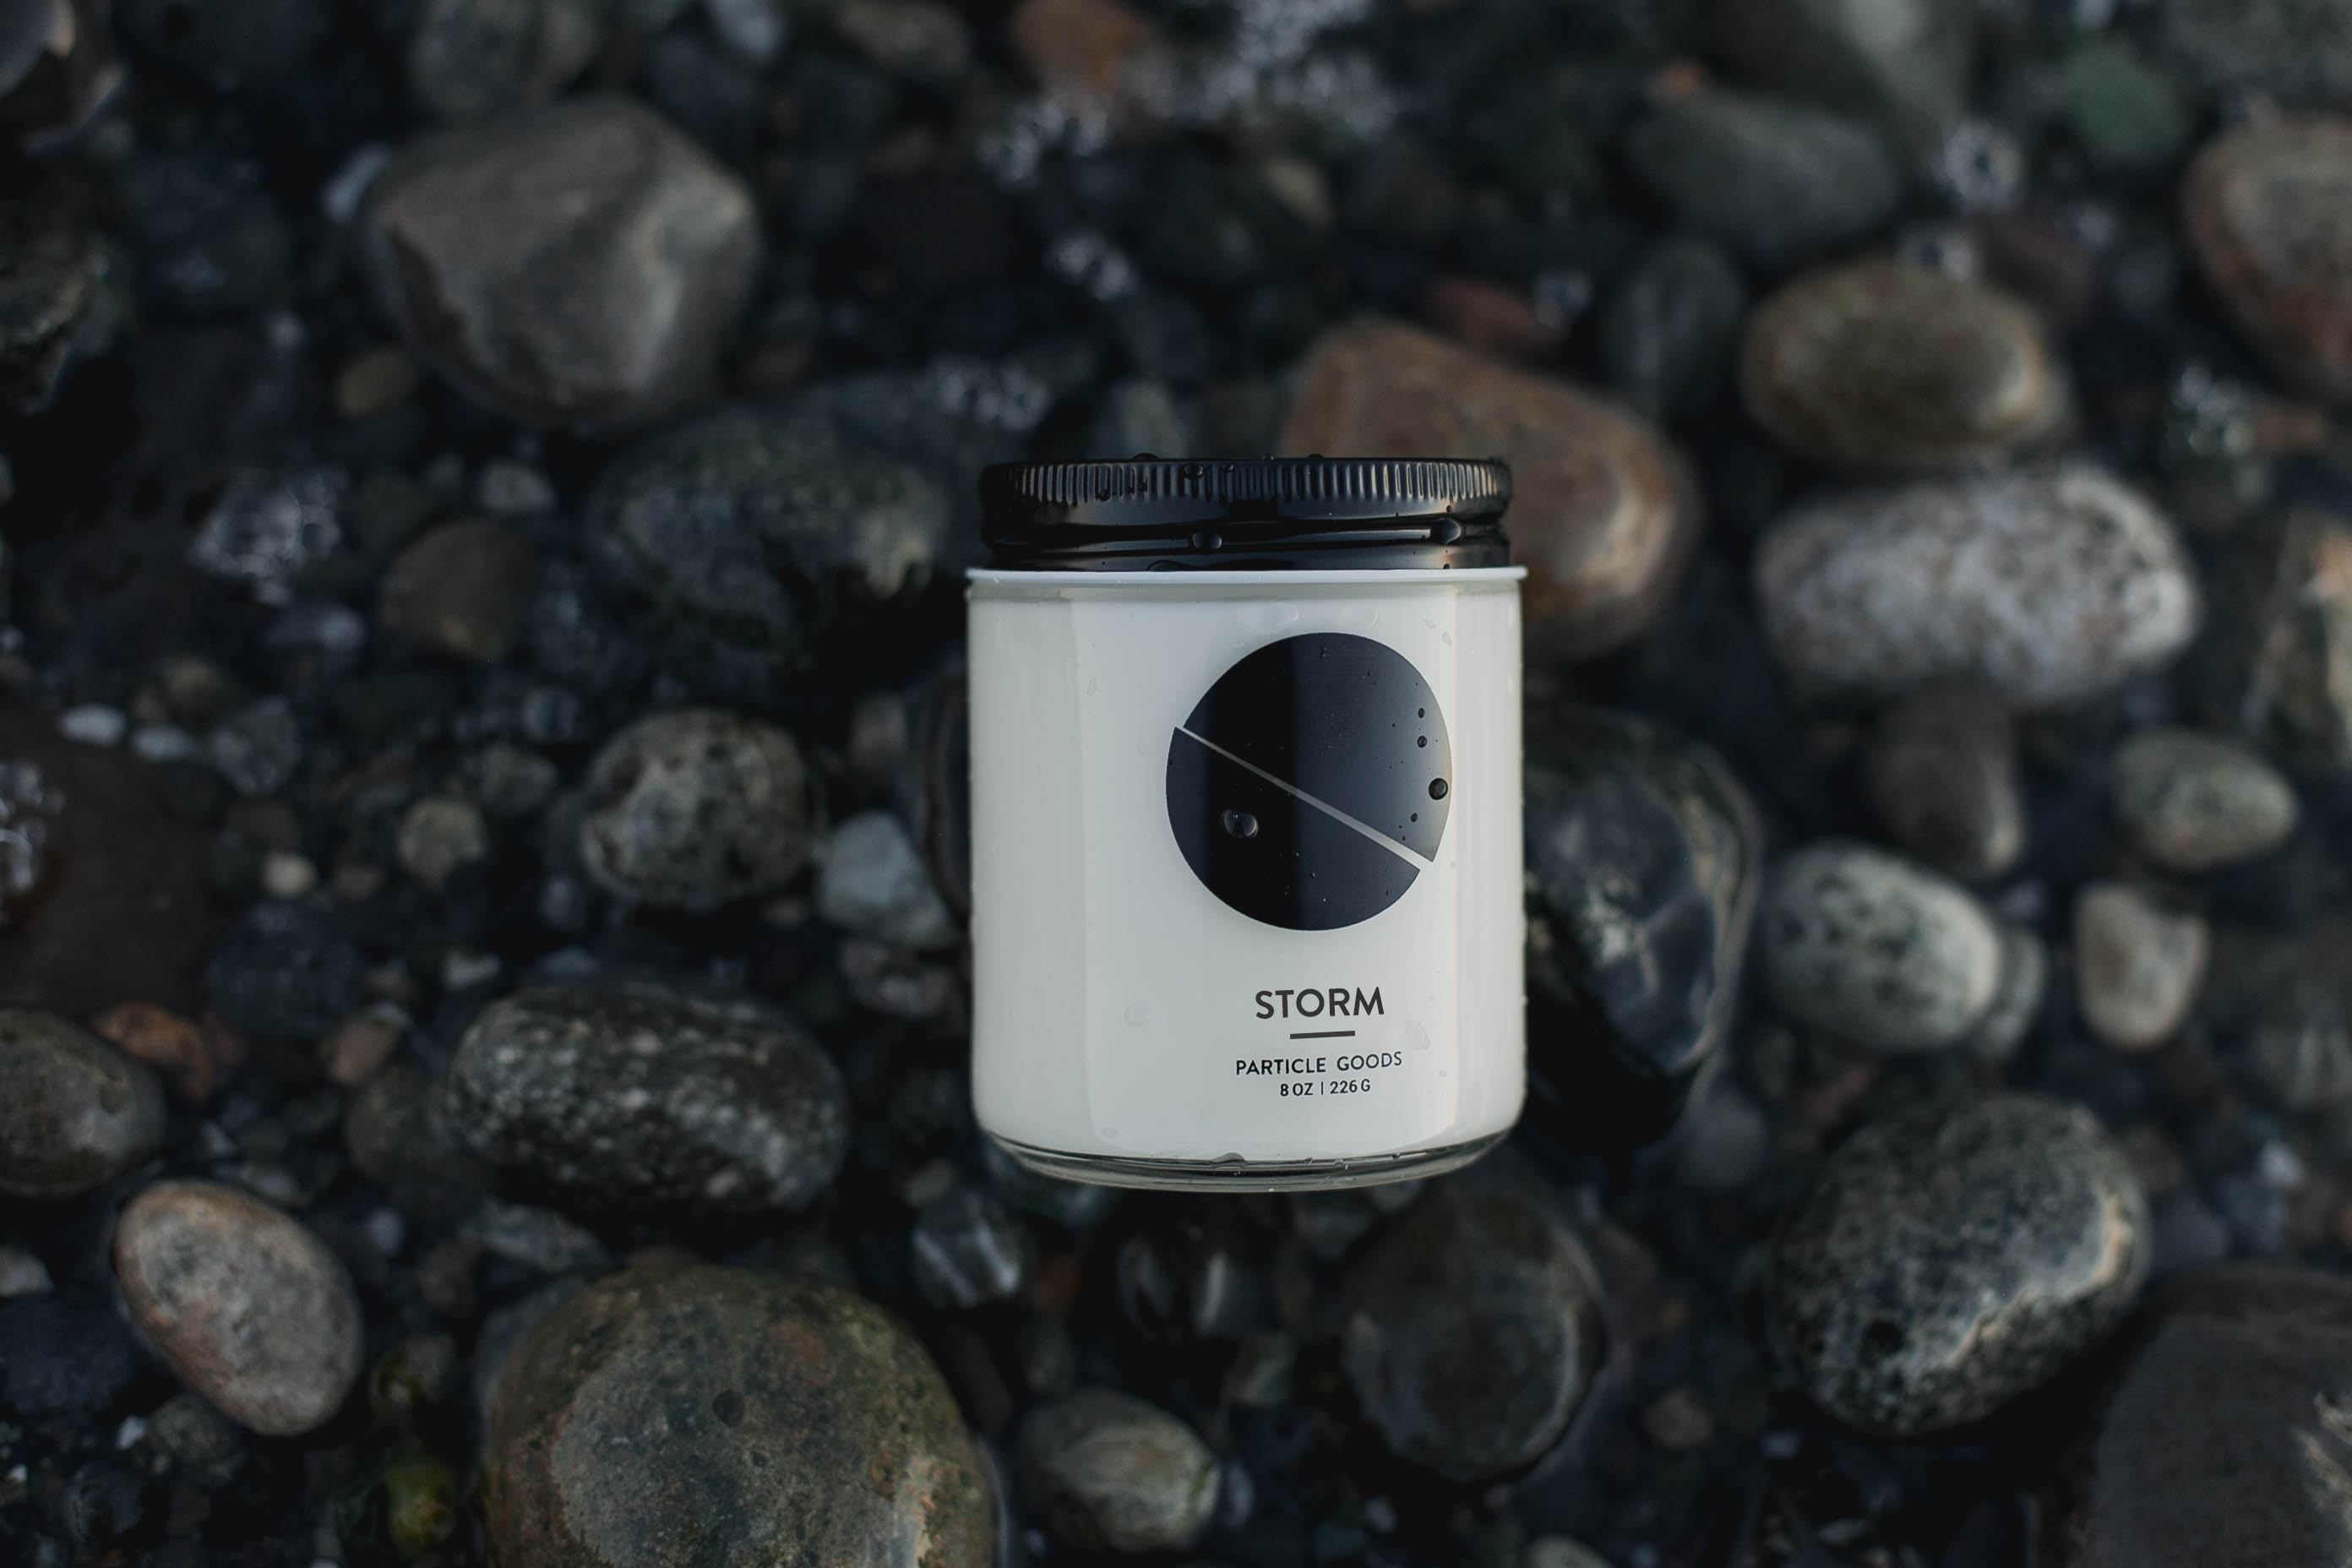 Interview with London of Particle Goods storm candle